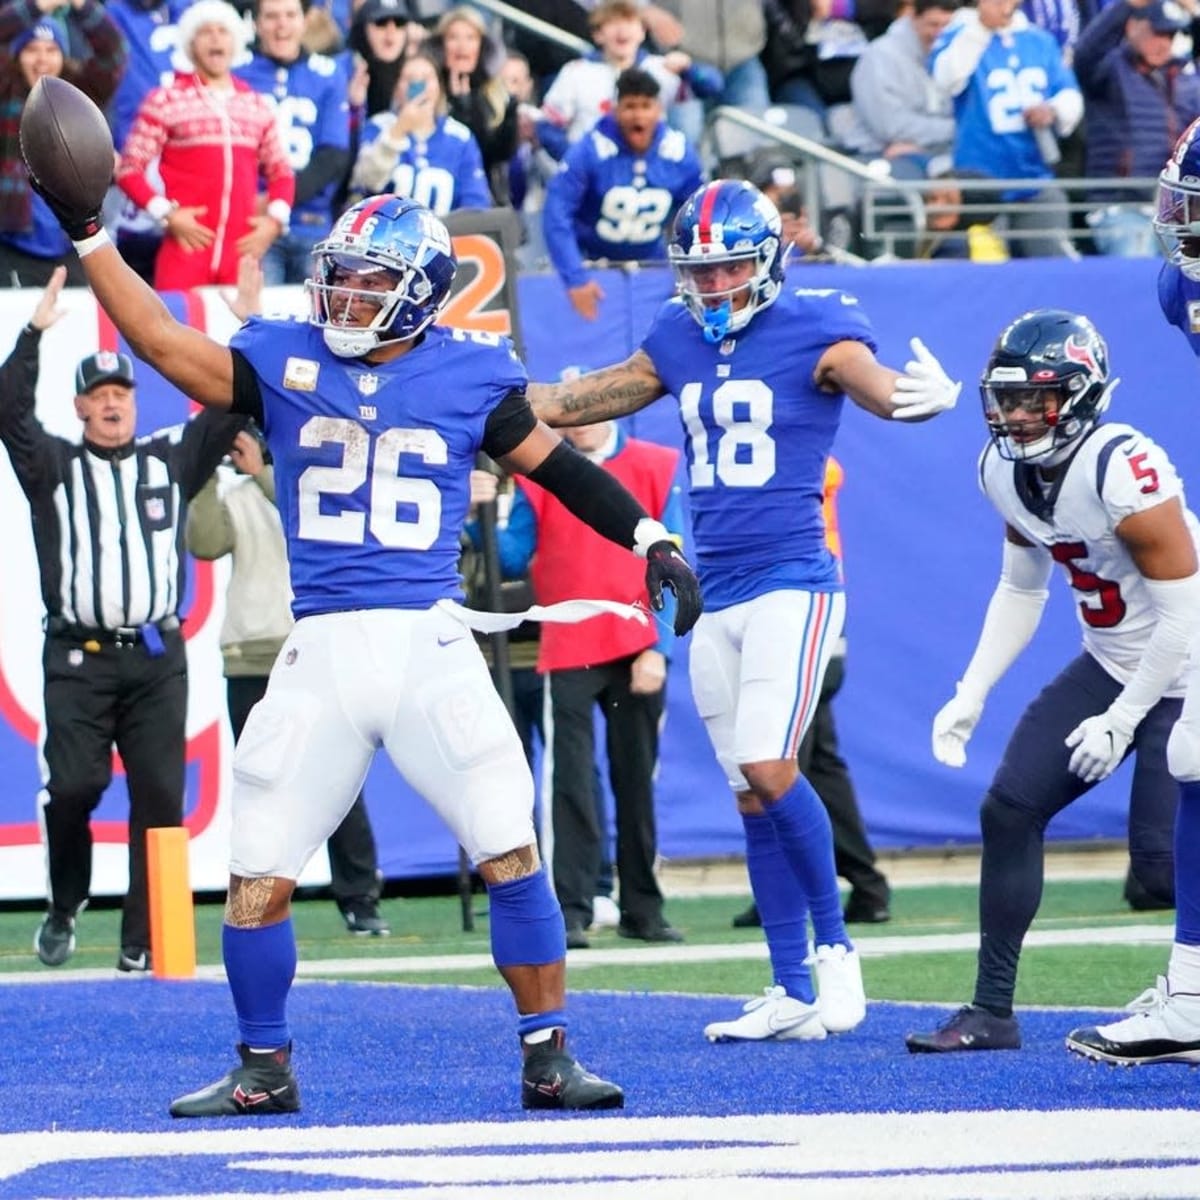 Giants vs. Bills live stream: TV channel, how to watch NFL today 